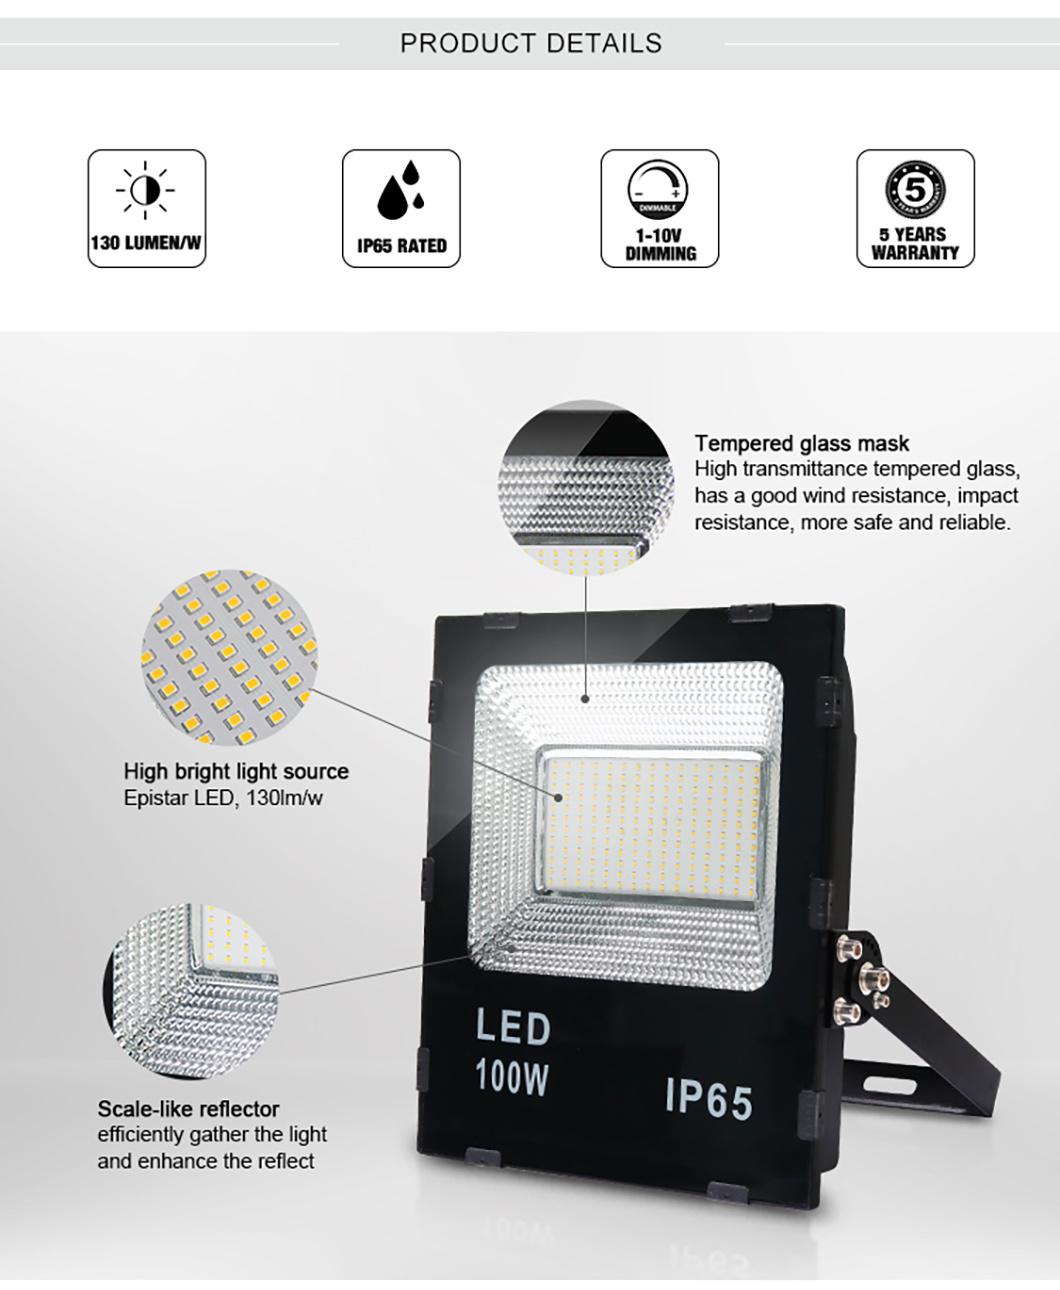 China Wholesale 100W 150W 200W 240W LED Flood Light Outdoor High Quality IP65 Waterproof Outdoor Light